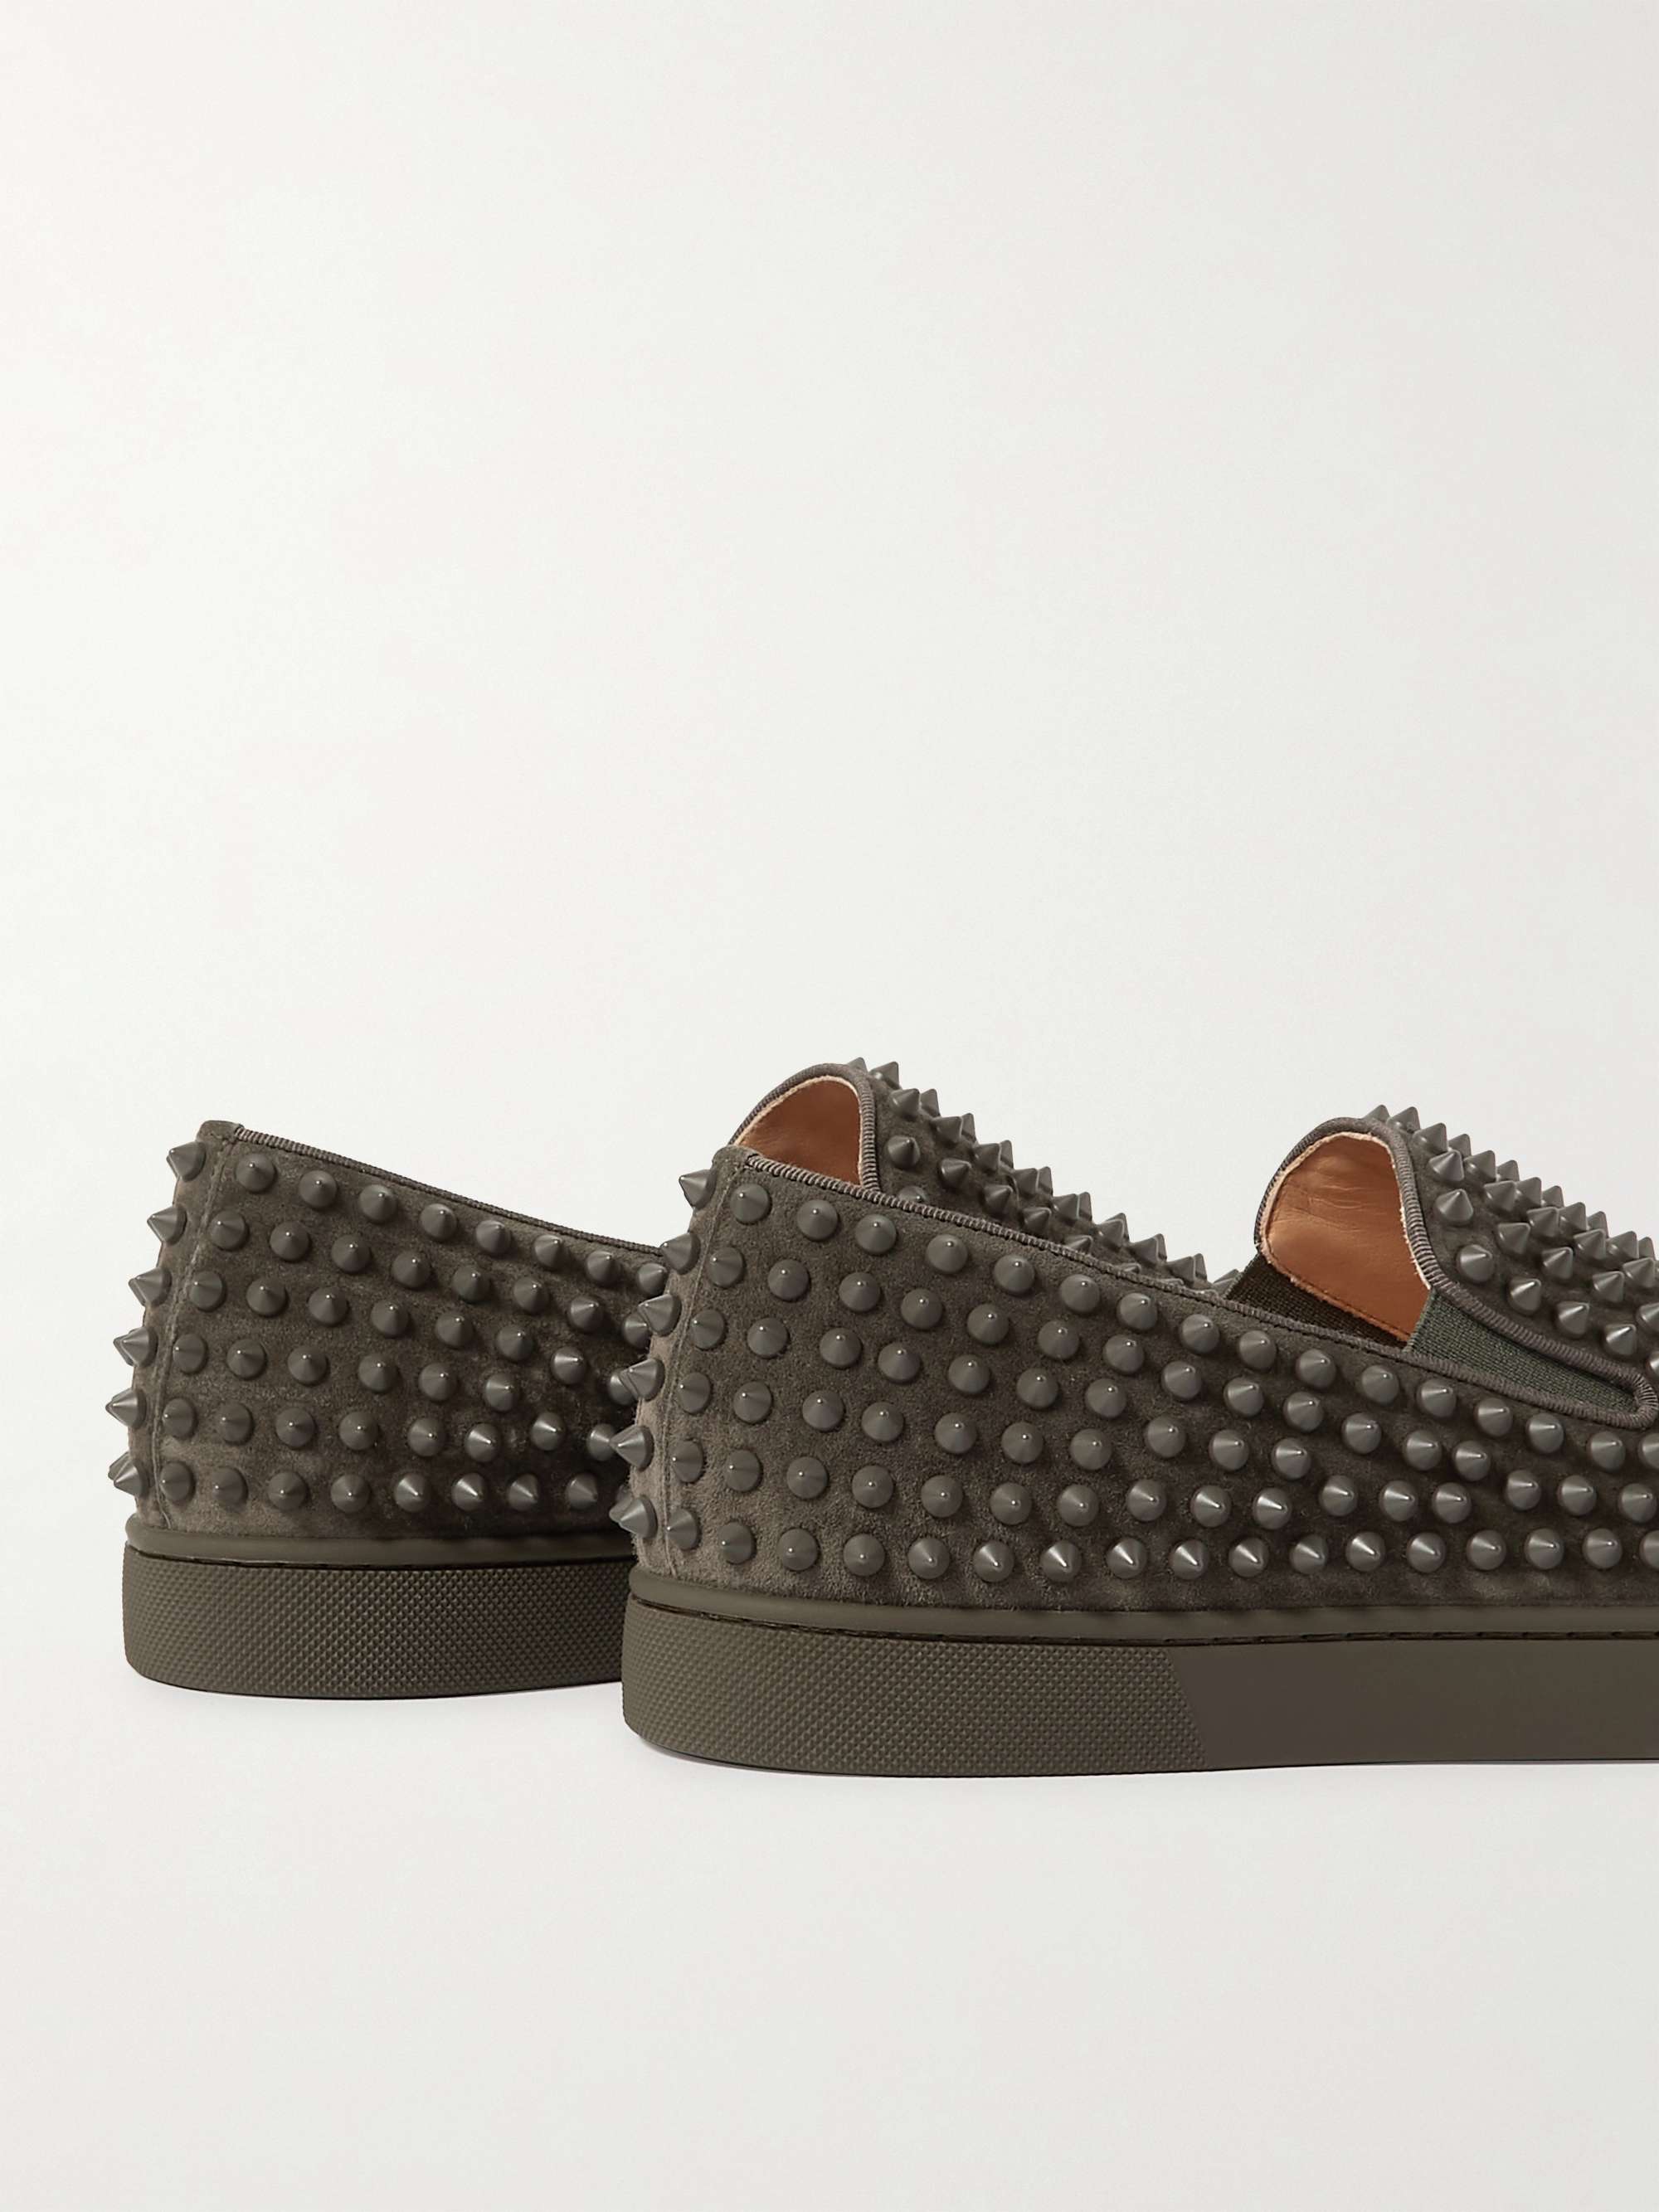 CHRISTIAN LOUBOUTIN Roller-Boat Spiked Suede Slip-On Sneakers